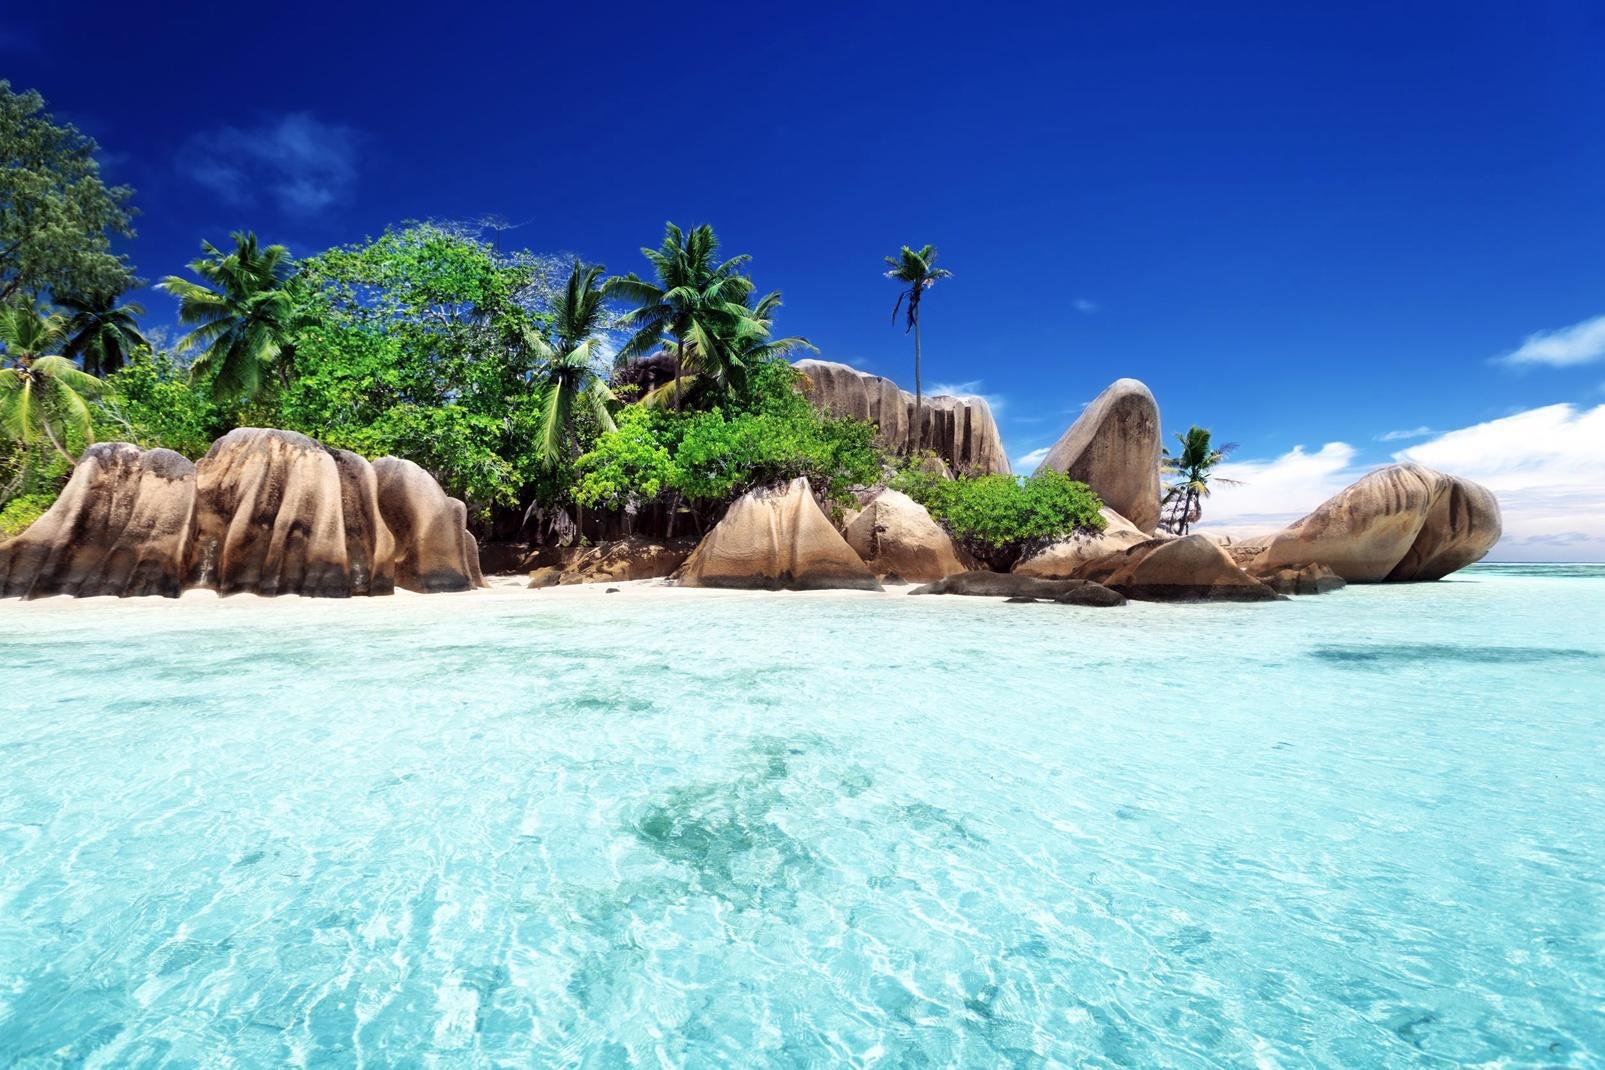 La Digue is unquestionably one of the most unforgettable islands of the Seychelles. Connected by boat or helicopter, this big rock 3 miles long and 3 km wide can be the reason for a day trip from Praslin. Once there, for travelling around you should opt for walking, using a bike or travelling by horse and cart, a means of transport that is just as picturesque as touristy. Because apart from a few rare ...